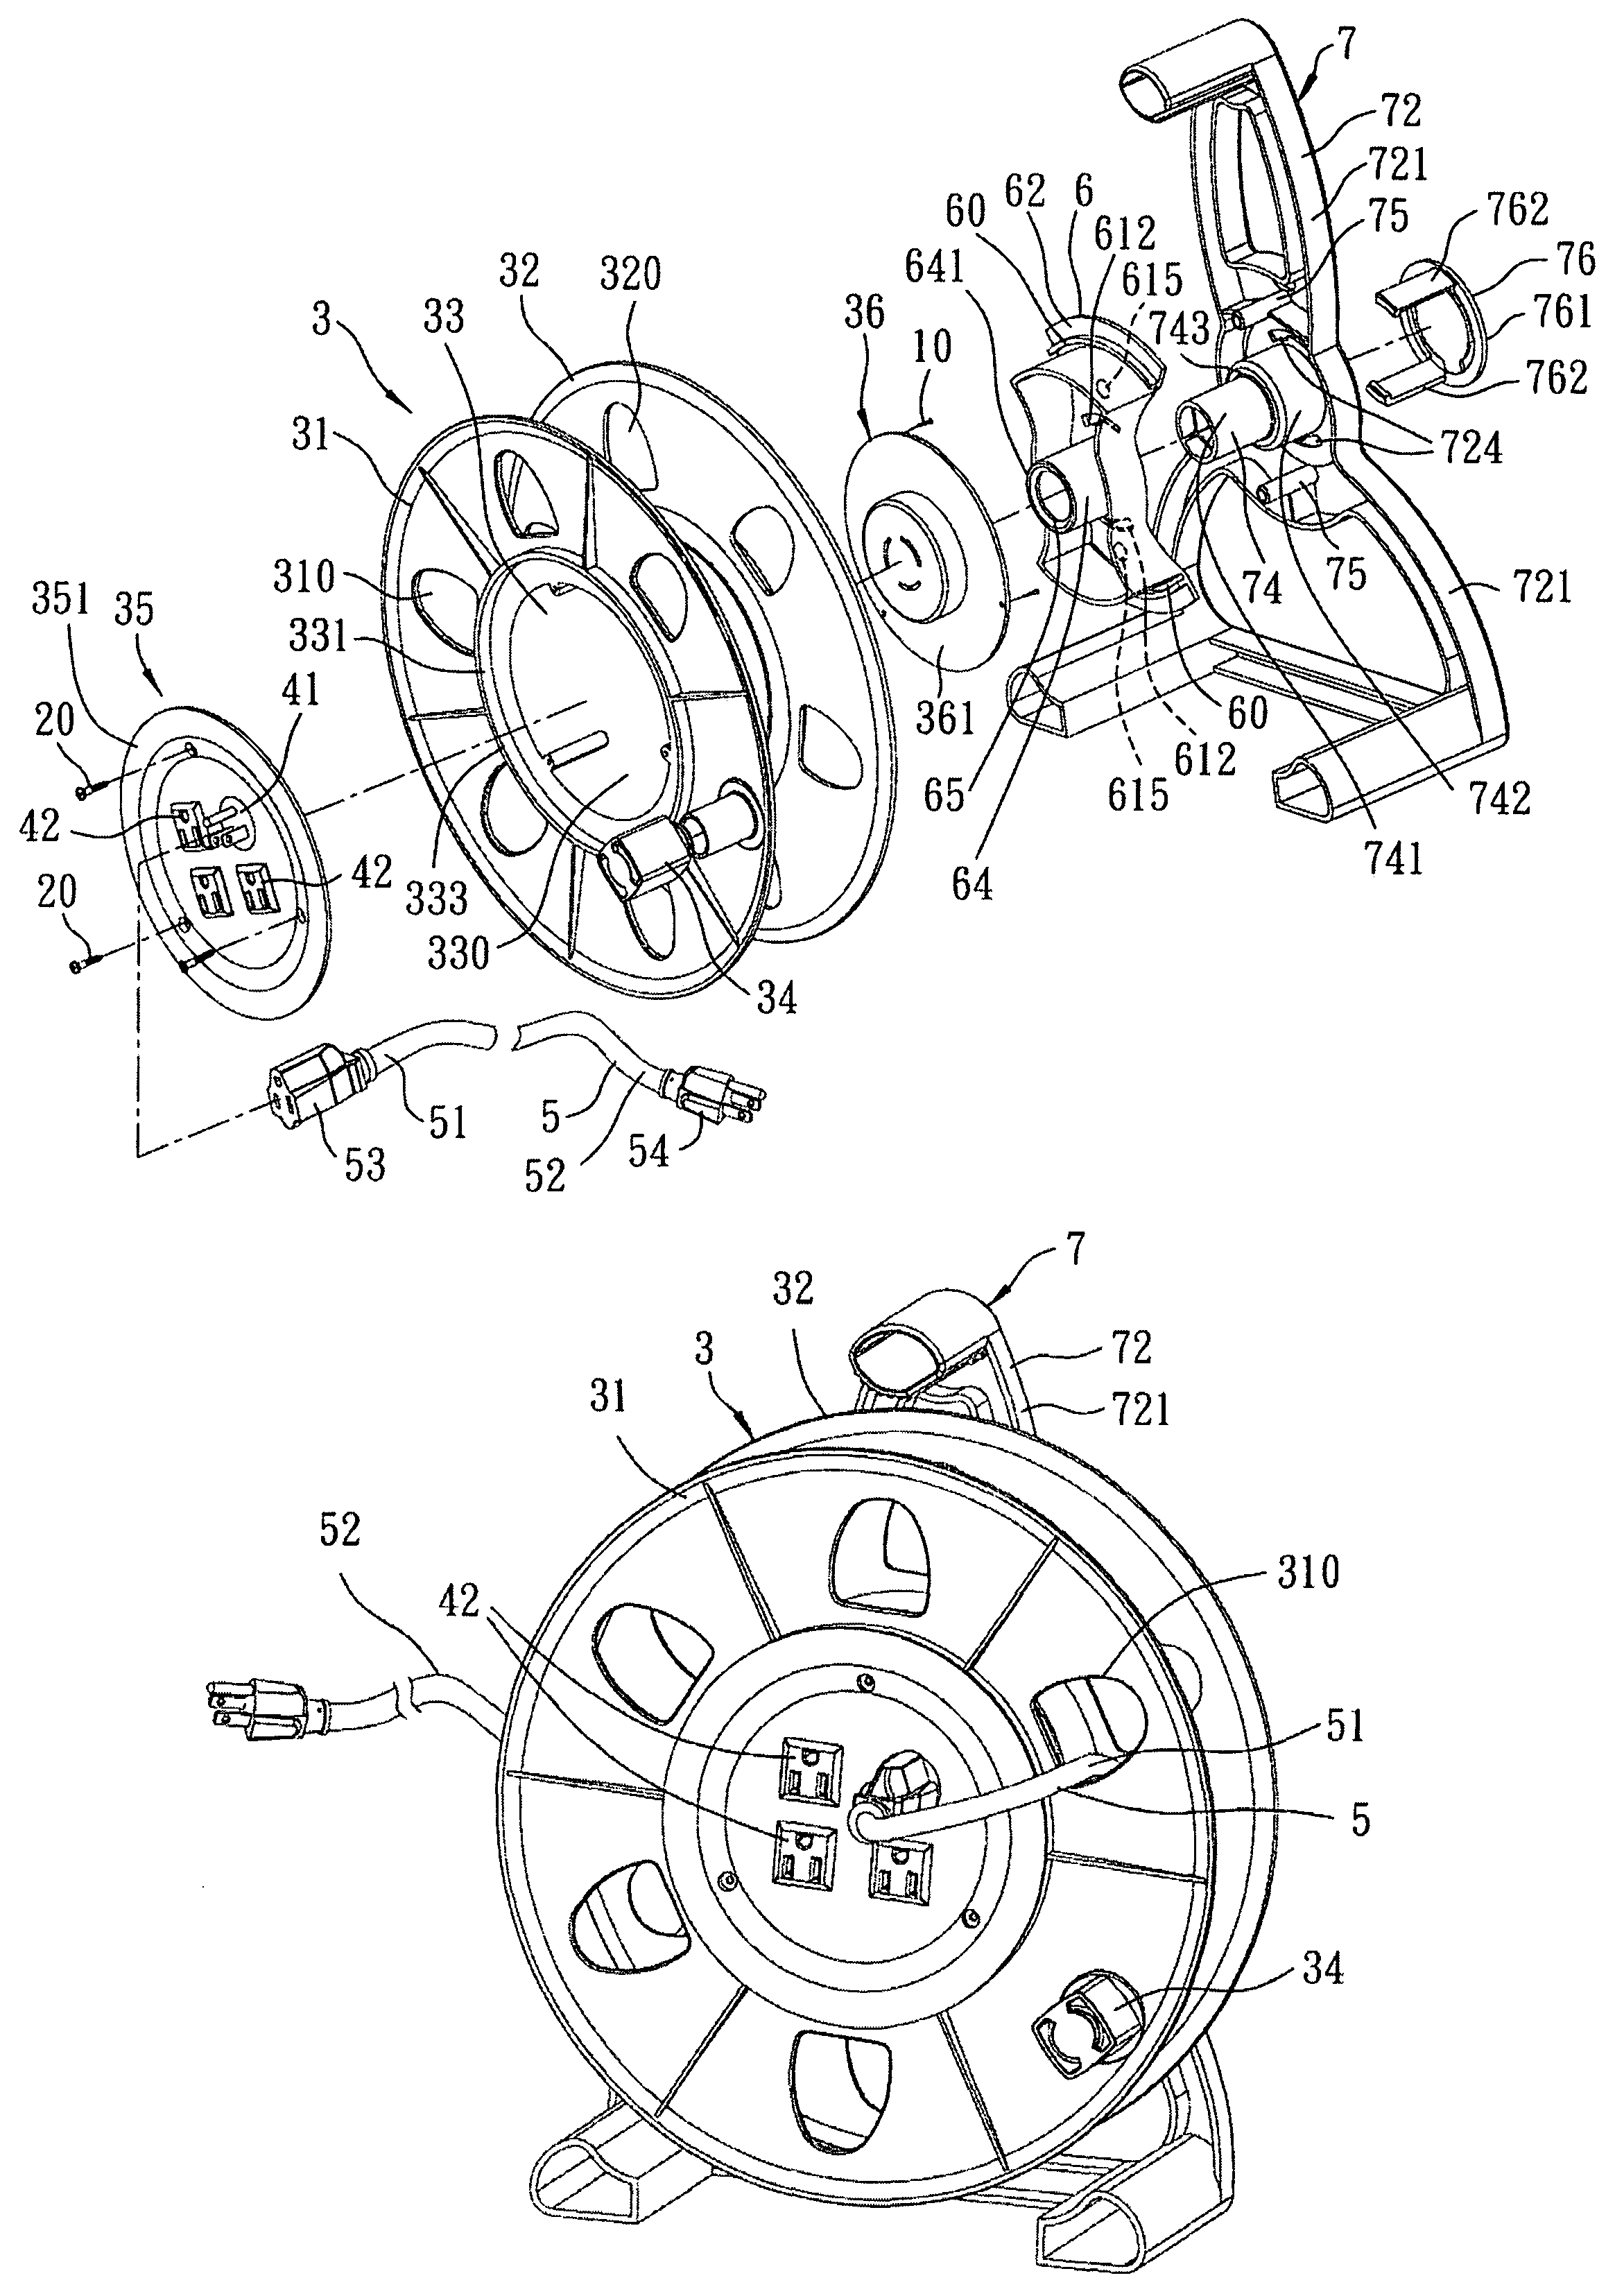 Reel device for winding an electrical cable thereon